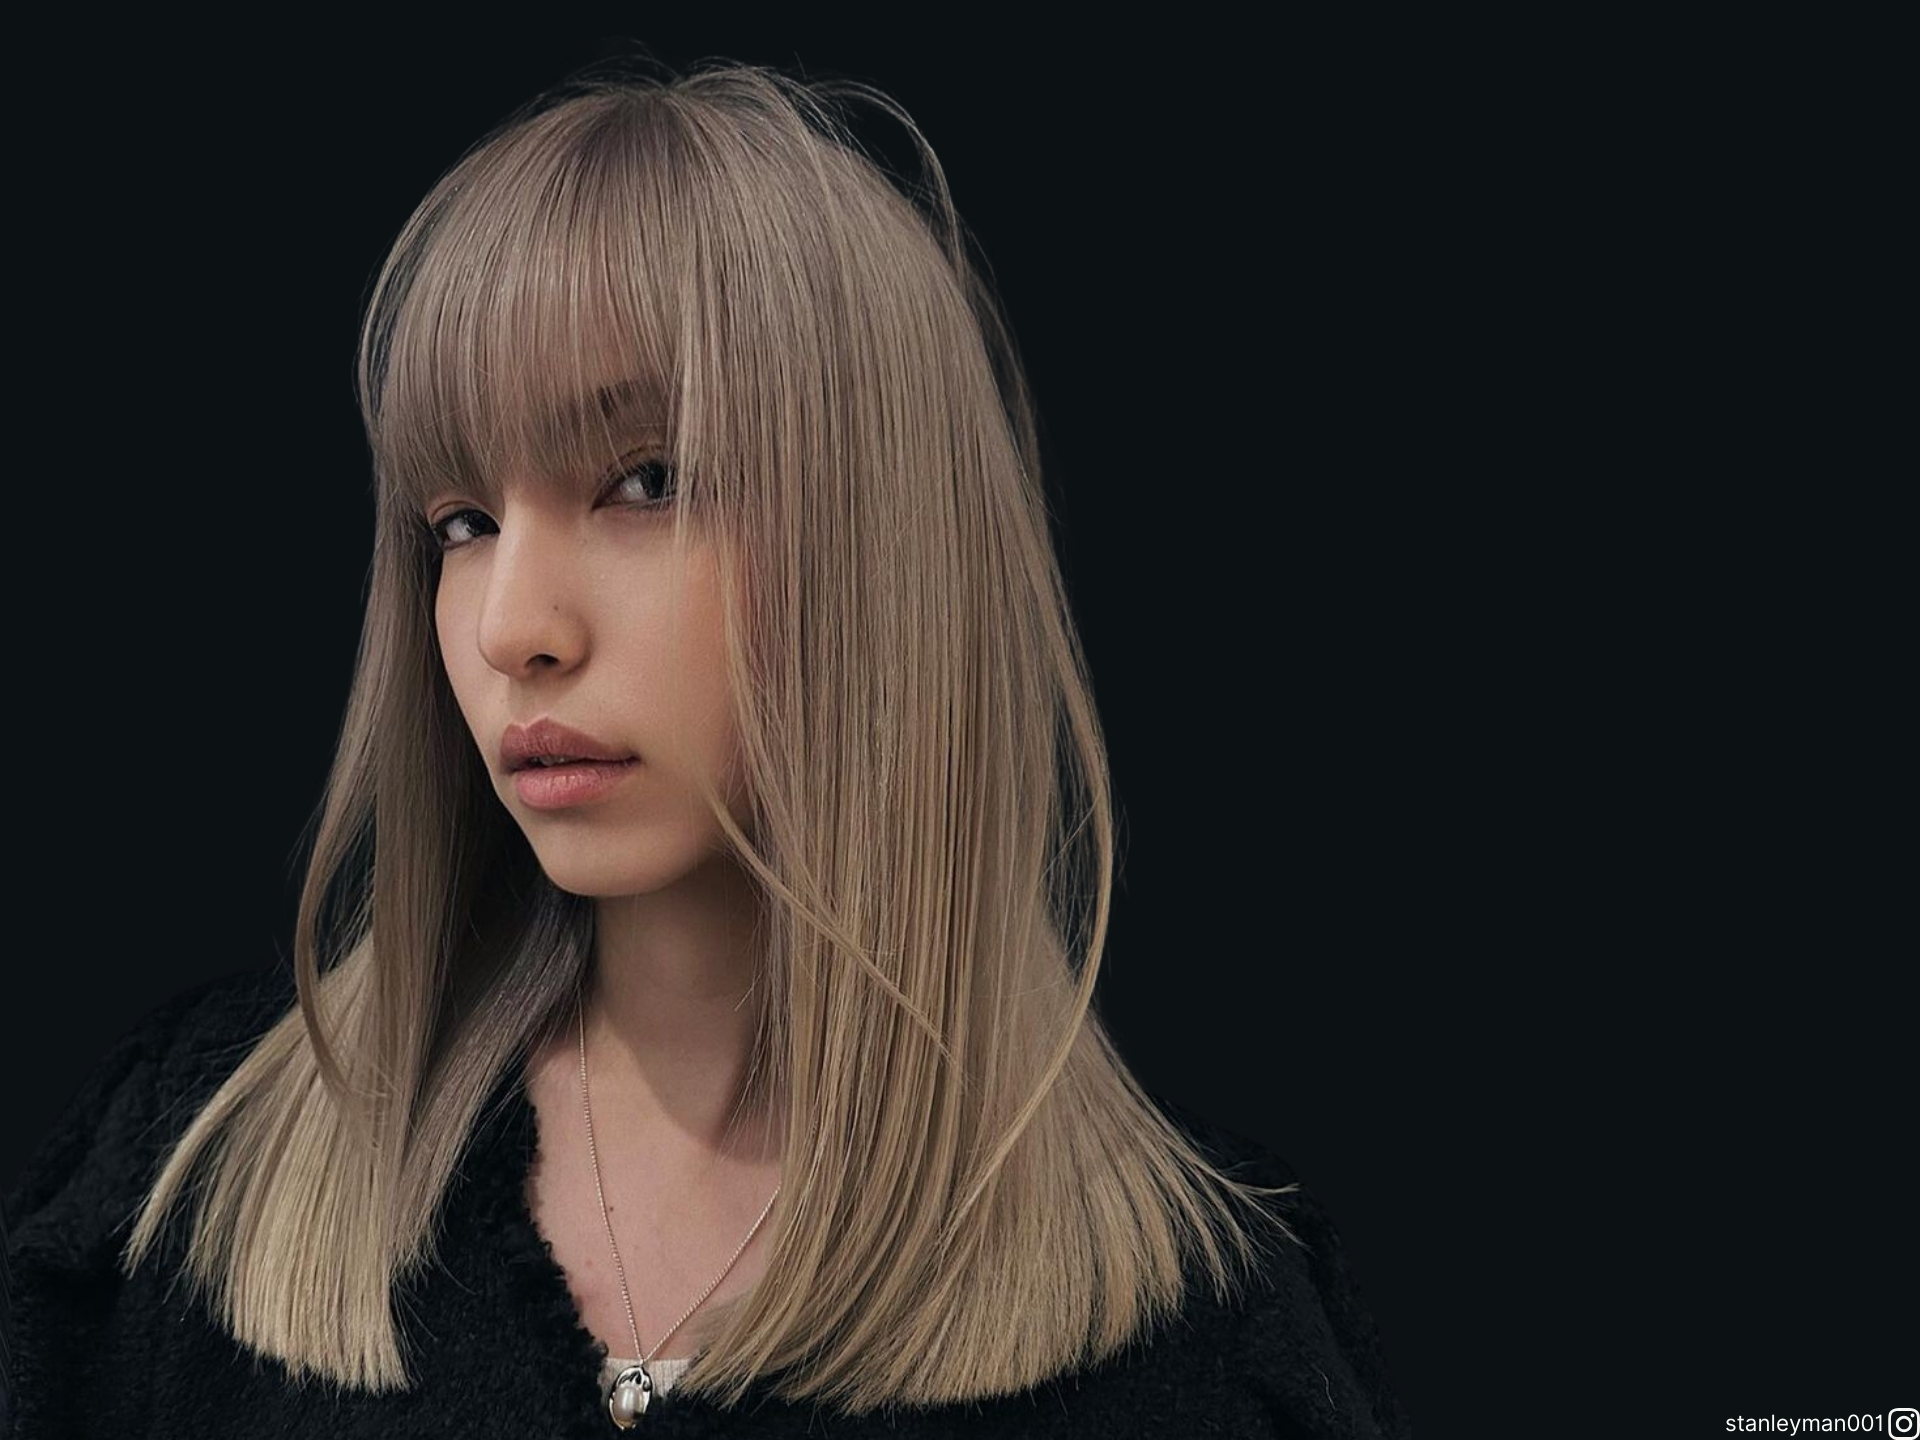 The Definitive Guide To Choosing The Right Type Of Bangs